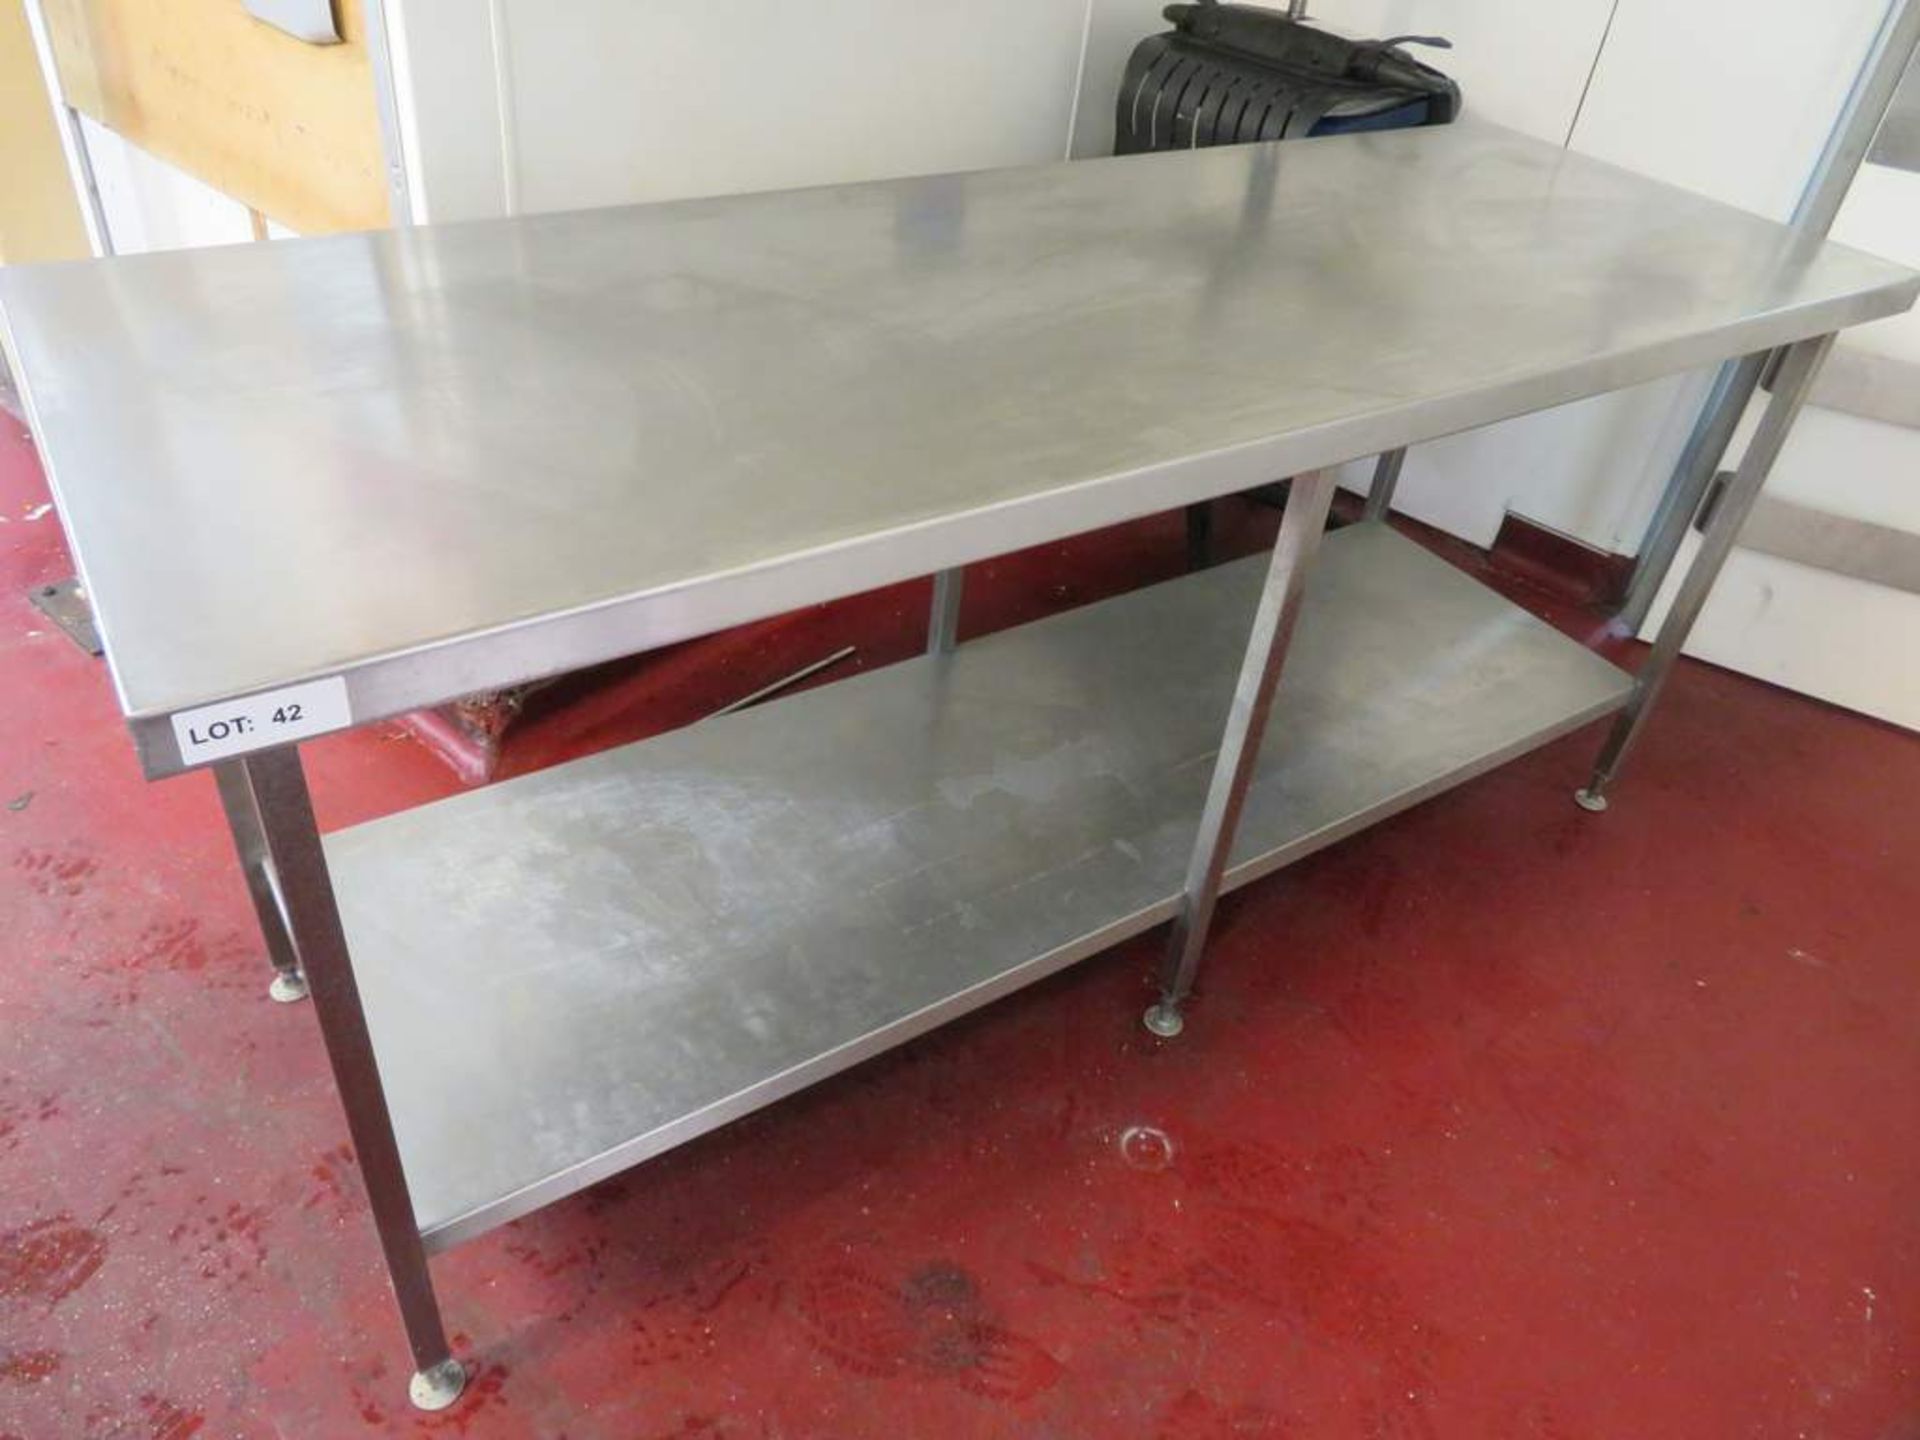 Stainless steel preparation unit